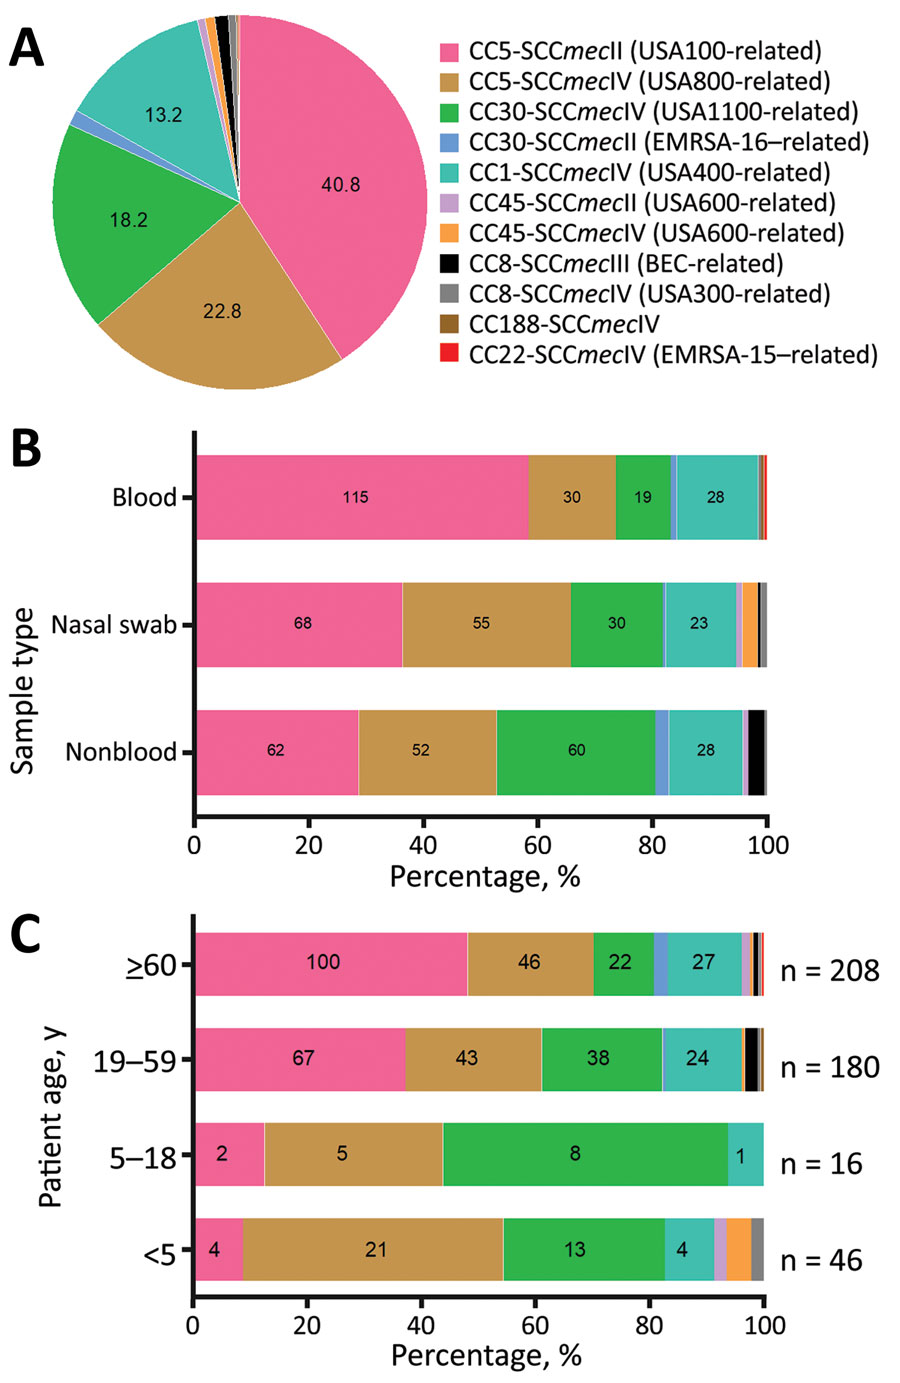 Distribution of 600 MRSA isolates by lineage (A), sample type (B), and patient age (C), Rio de Janeiro Brazil, 2014–2017. A) MRSA isolates by lineage (CC-SCCmec type) among 600 isolates. Labels indicate proportions. B) MRSA isolates by sample type. Labels indicate number of isolates. C) MRSA isolates by patient age (data available for 450 patients). Labels indicate number of isolates. BEC, Brazilian endemic clone; CC, clonal complex; EMRSA, epidemic methicillin-resistant Staphylococcus aureus; MRSA, methicillin-resistant Staphylococcus aureus; SCC, staphylococcal cassette chromosome.